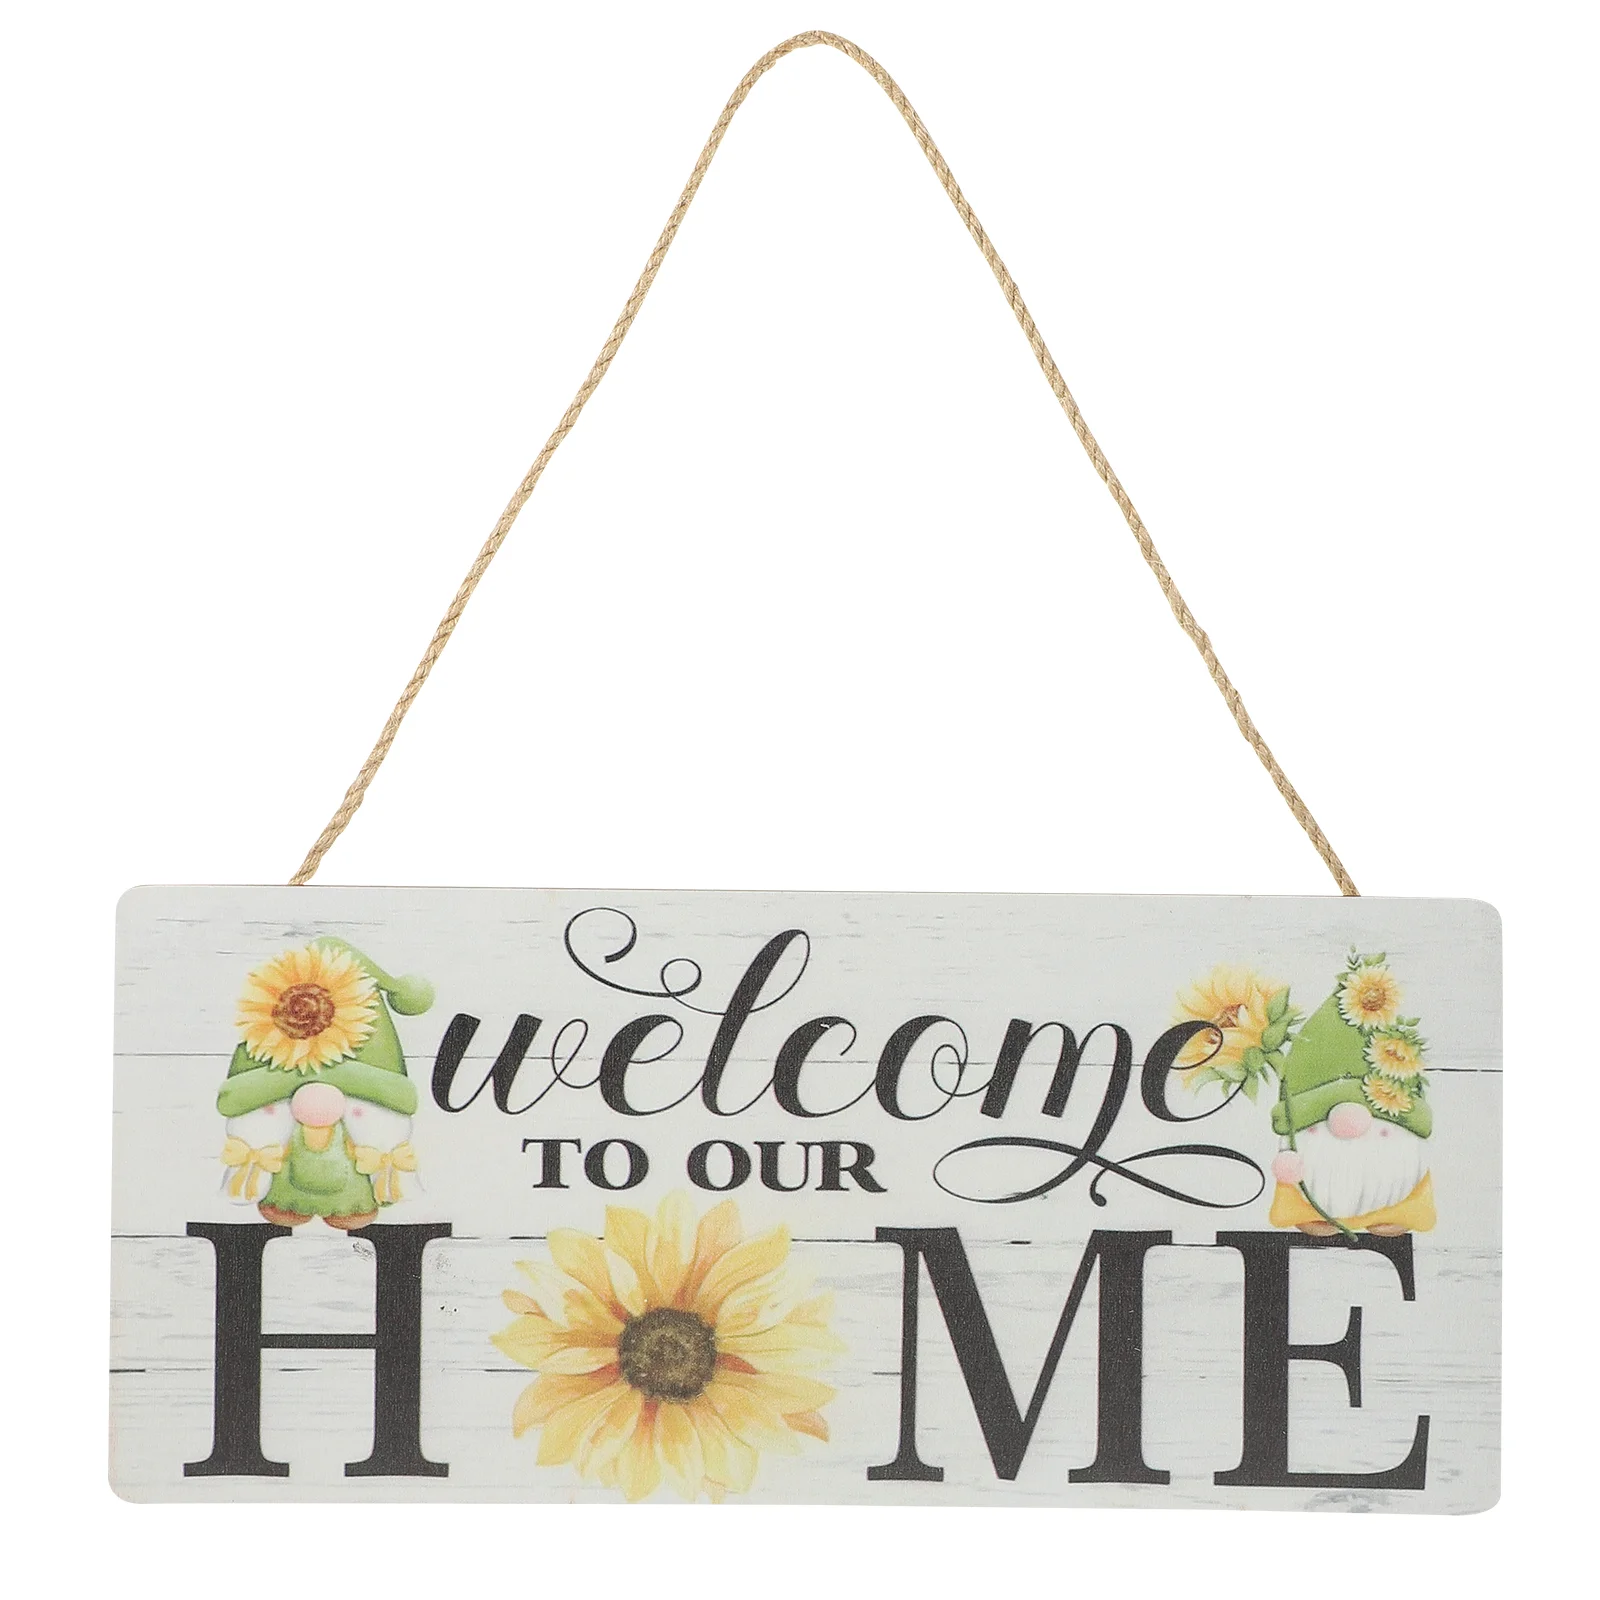 

Decorative Door Board Home Welcome Ornament Halloween Decorations Outdoor Farmhouse Porch Sign Hanging Wooden Plaque Rectangle